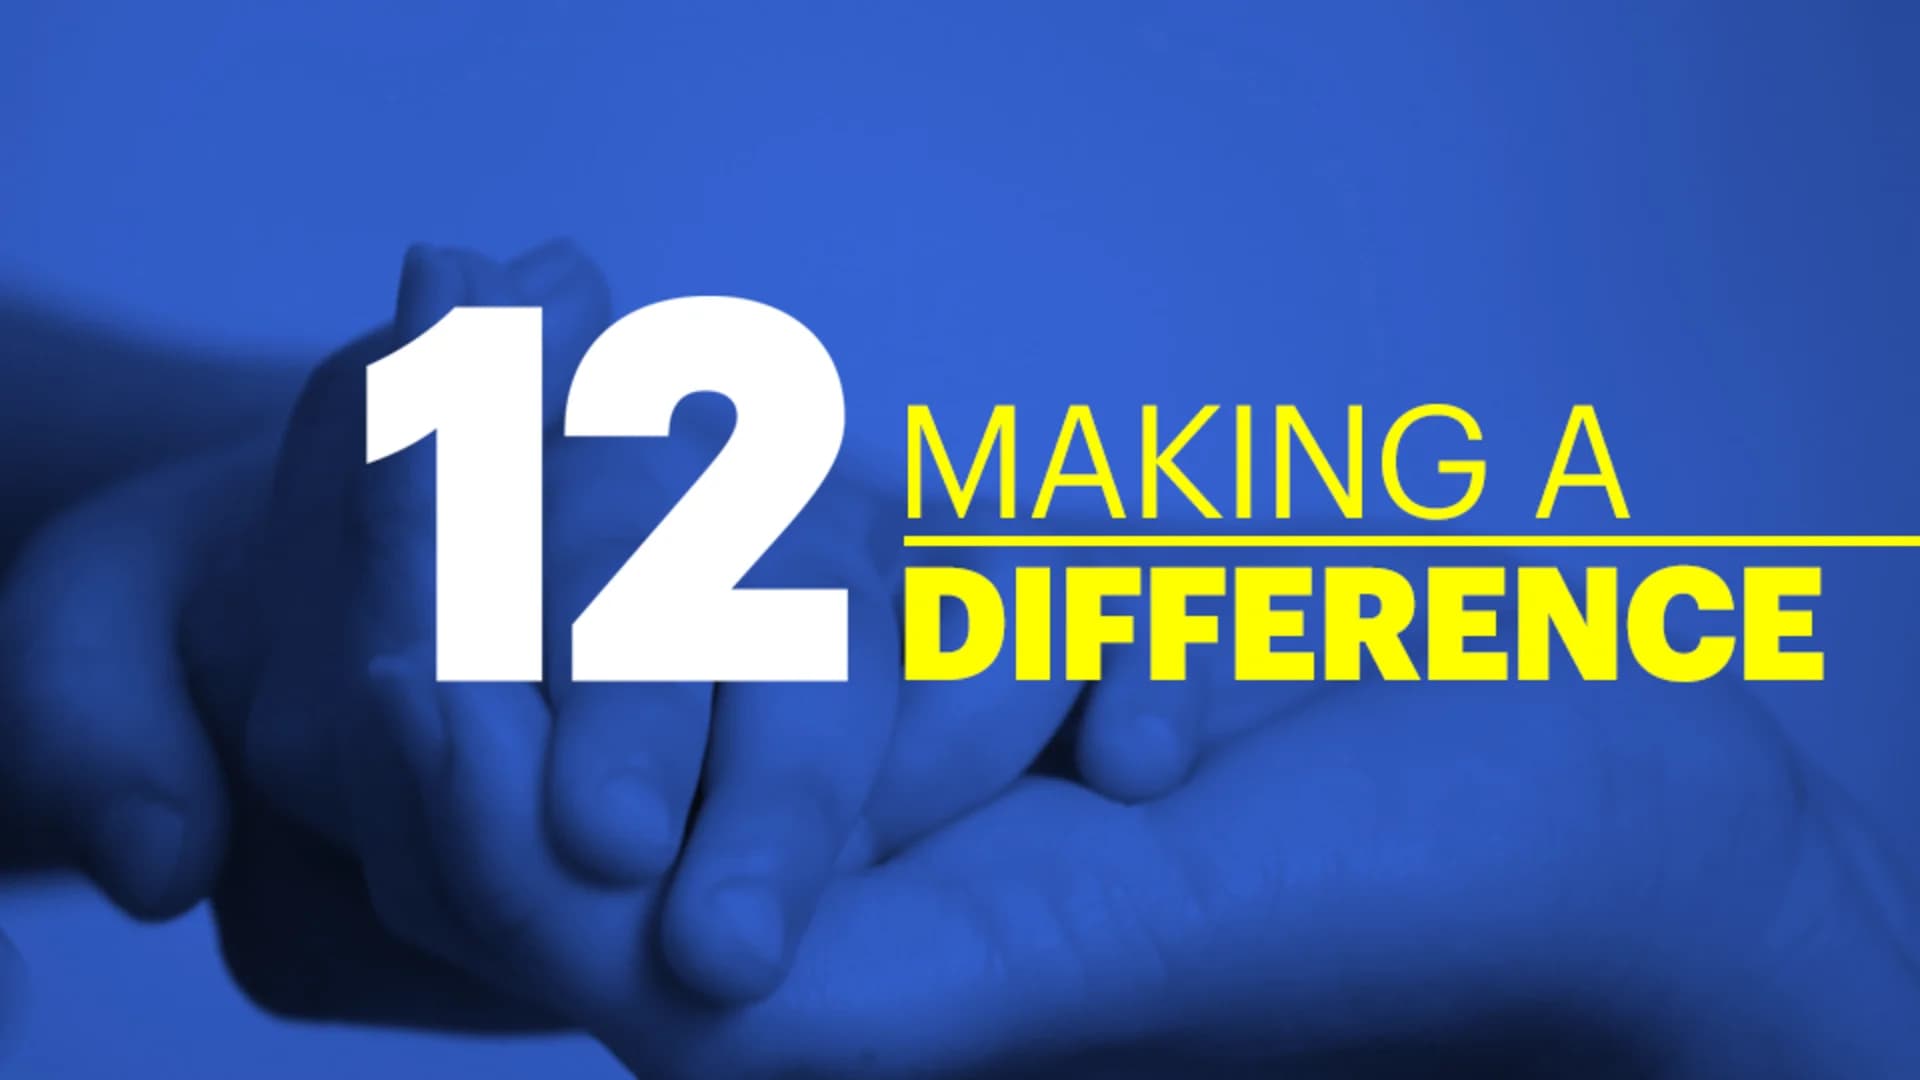 12 Making a Difference Information